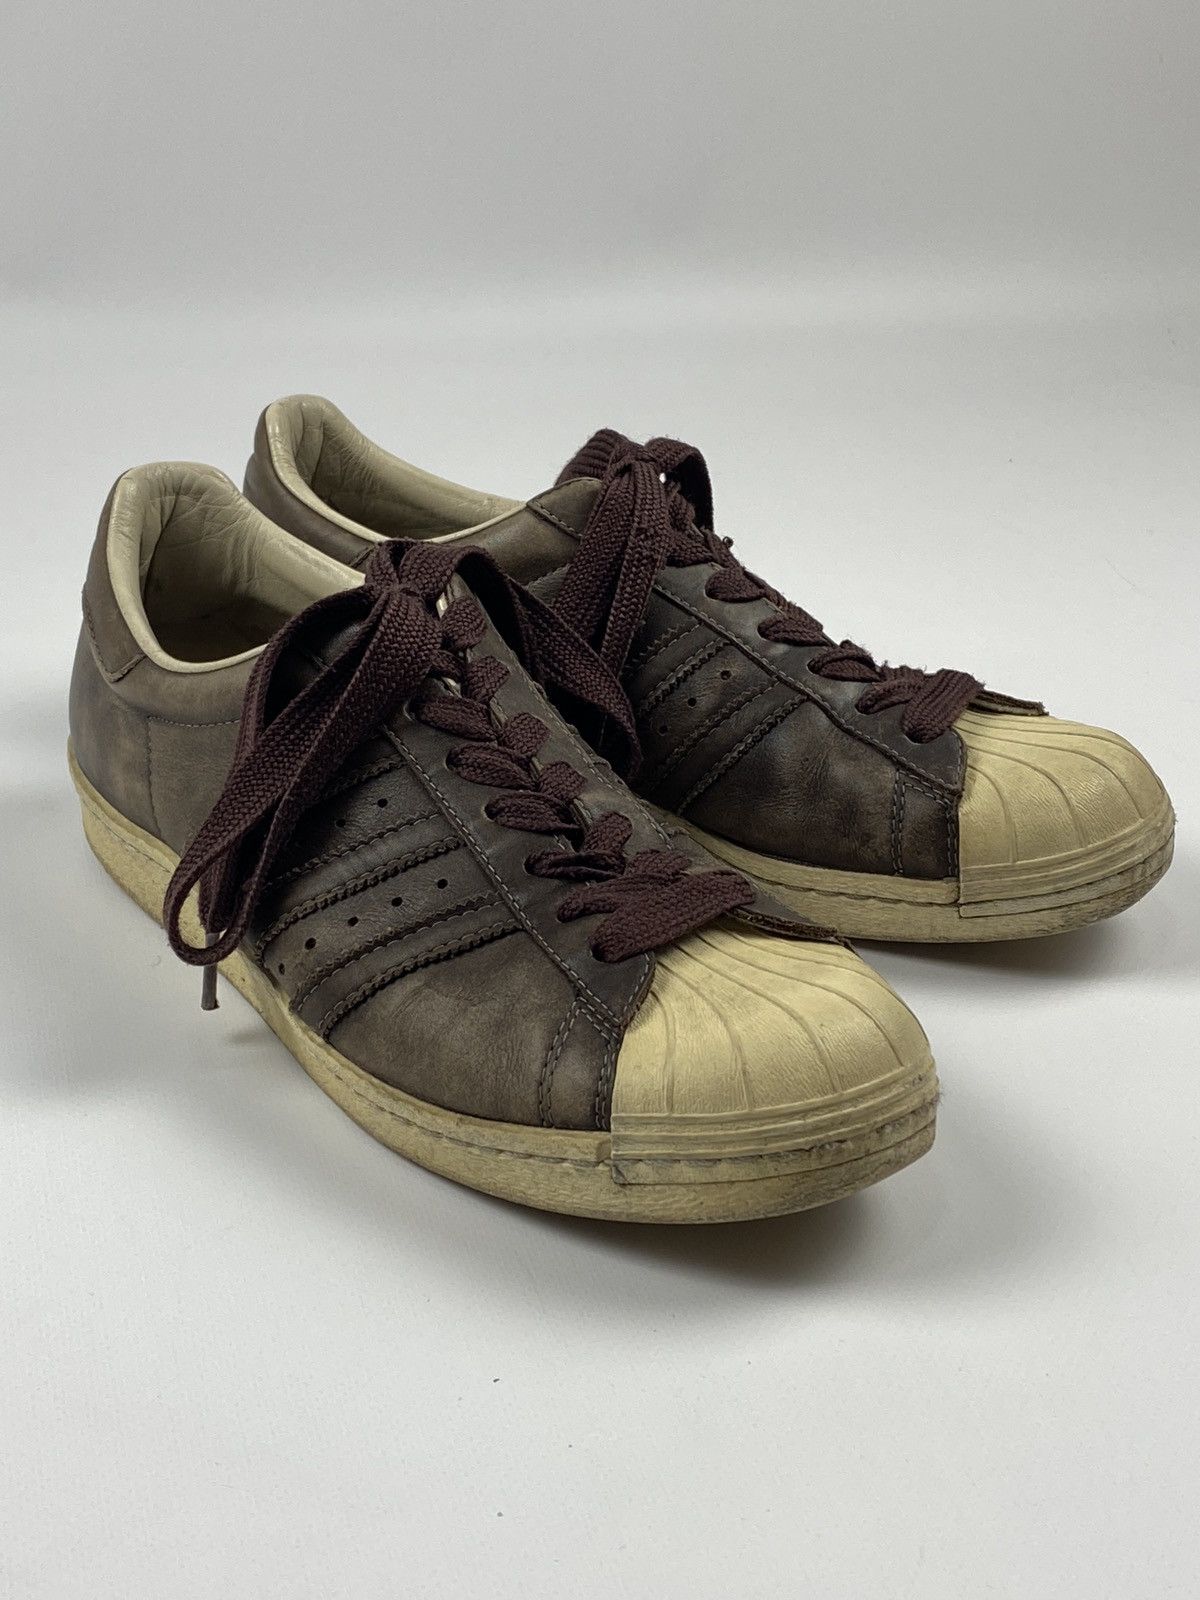 Pre-owned Adidas X Archival Clothing Adidas Premium Leather Vintage Brown Superstar 80's Y2k Shoes